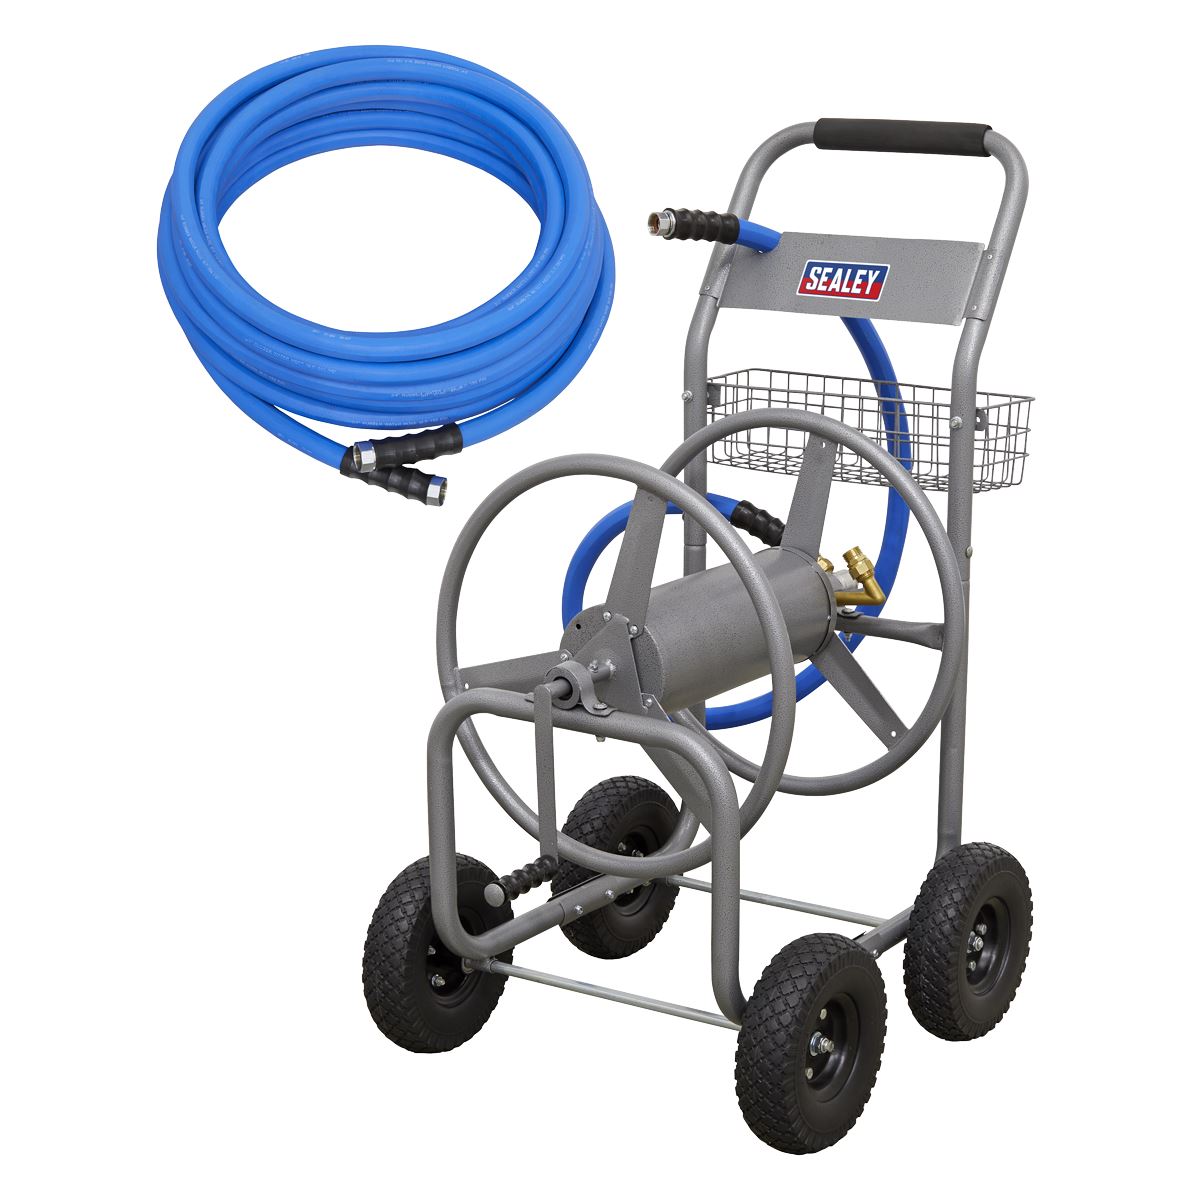 Sealey Heavy-Duty Hose Reel Cart with 30m Heavy-Duty Ø19mm Hot & Cold Rubber Water Hose